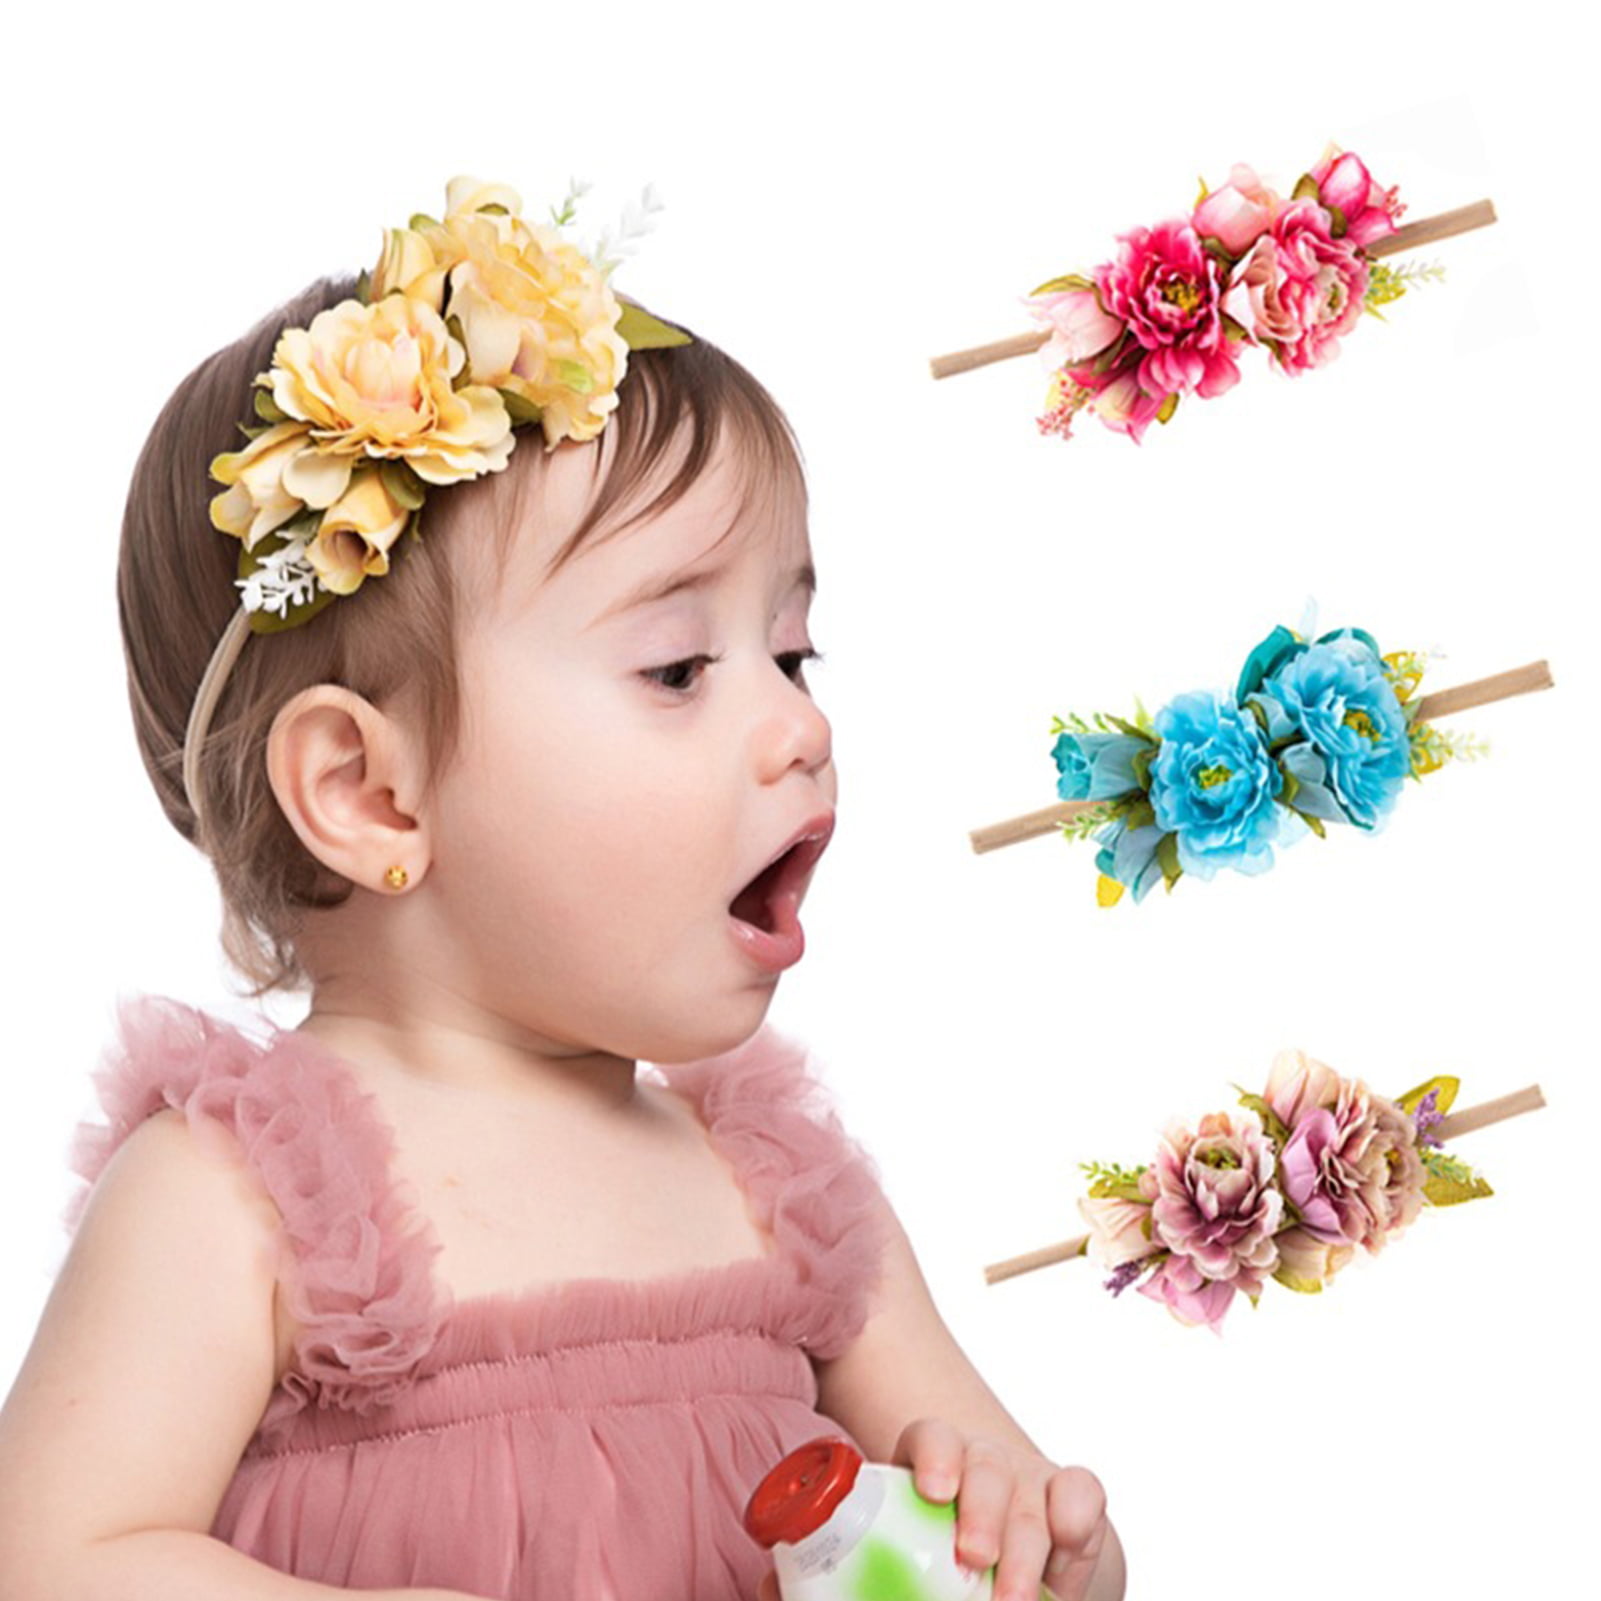 BABY GIRL  HEADBANDS WITH A NETTING OVERLAY FLOWER APPROX SIZE 0-6 MTHS